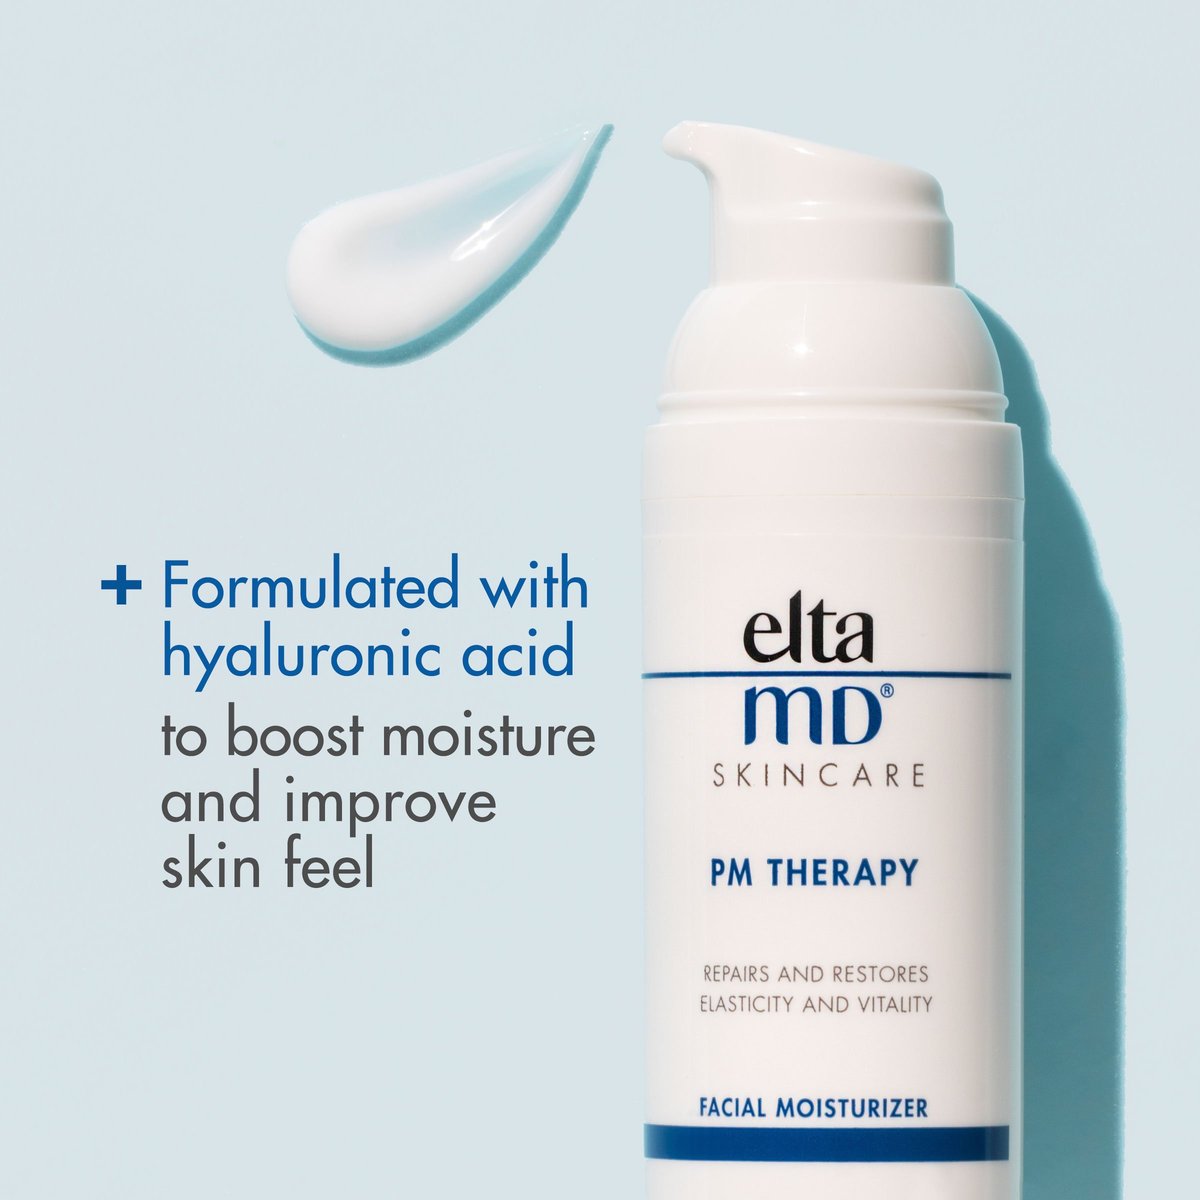 Elta MD PM Therapy